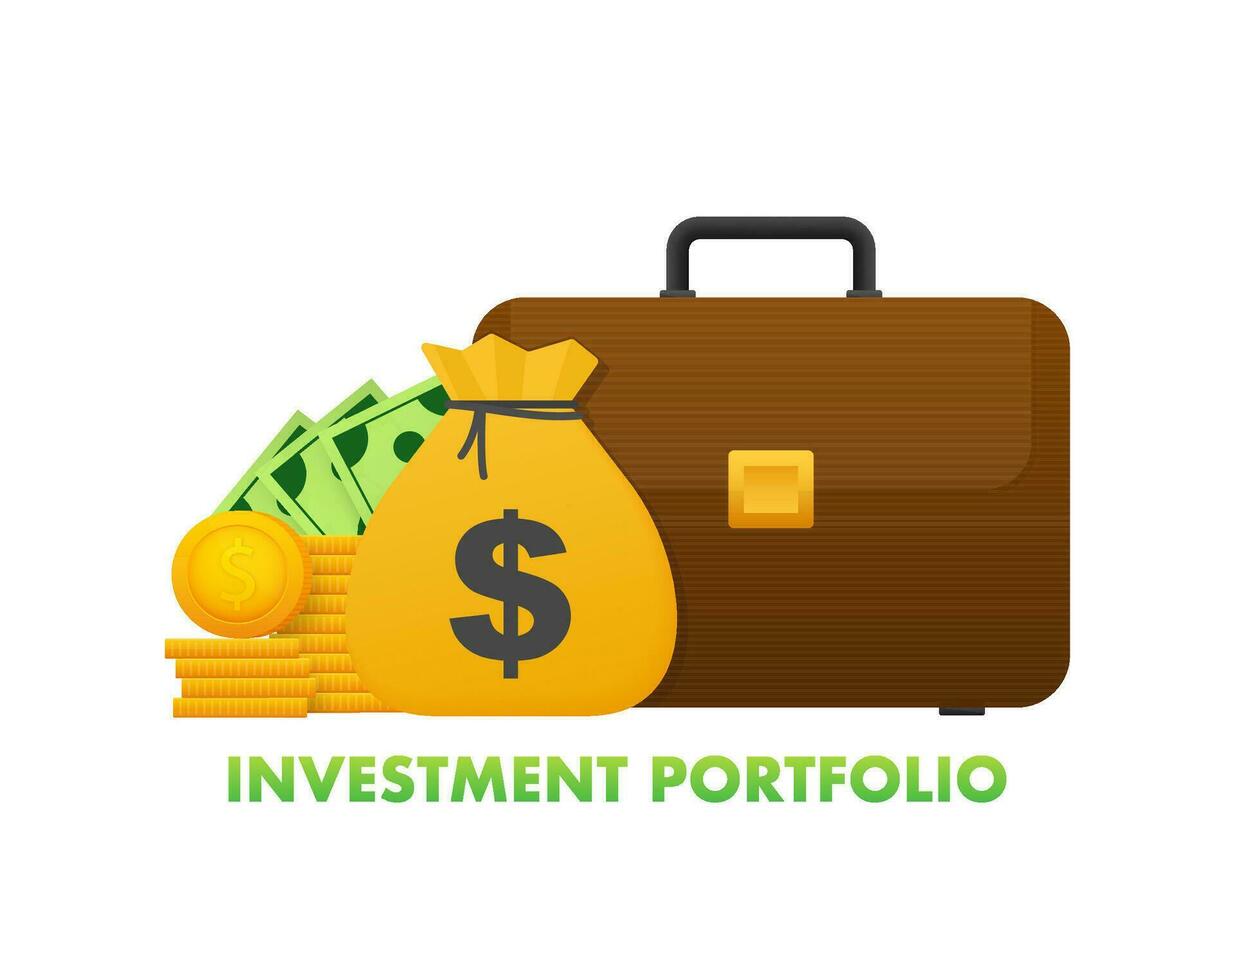 Investor portfolio. Business document gallery with money investments and success. vector